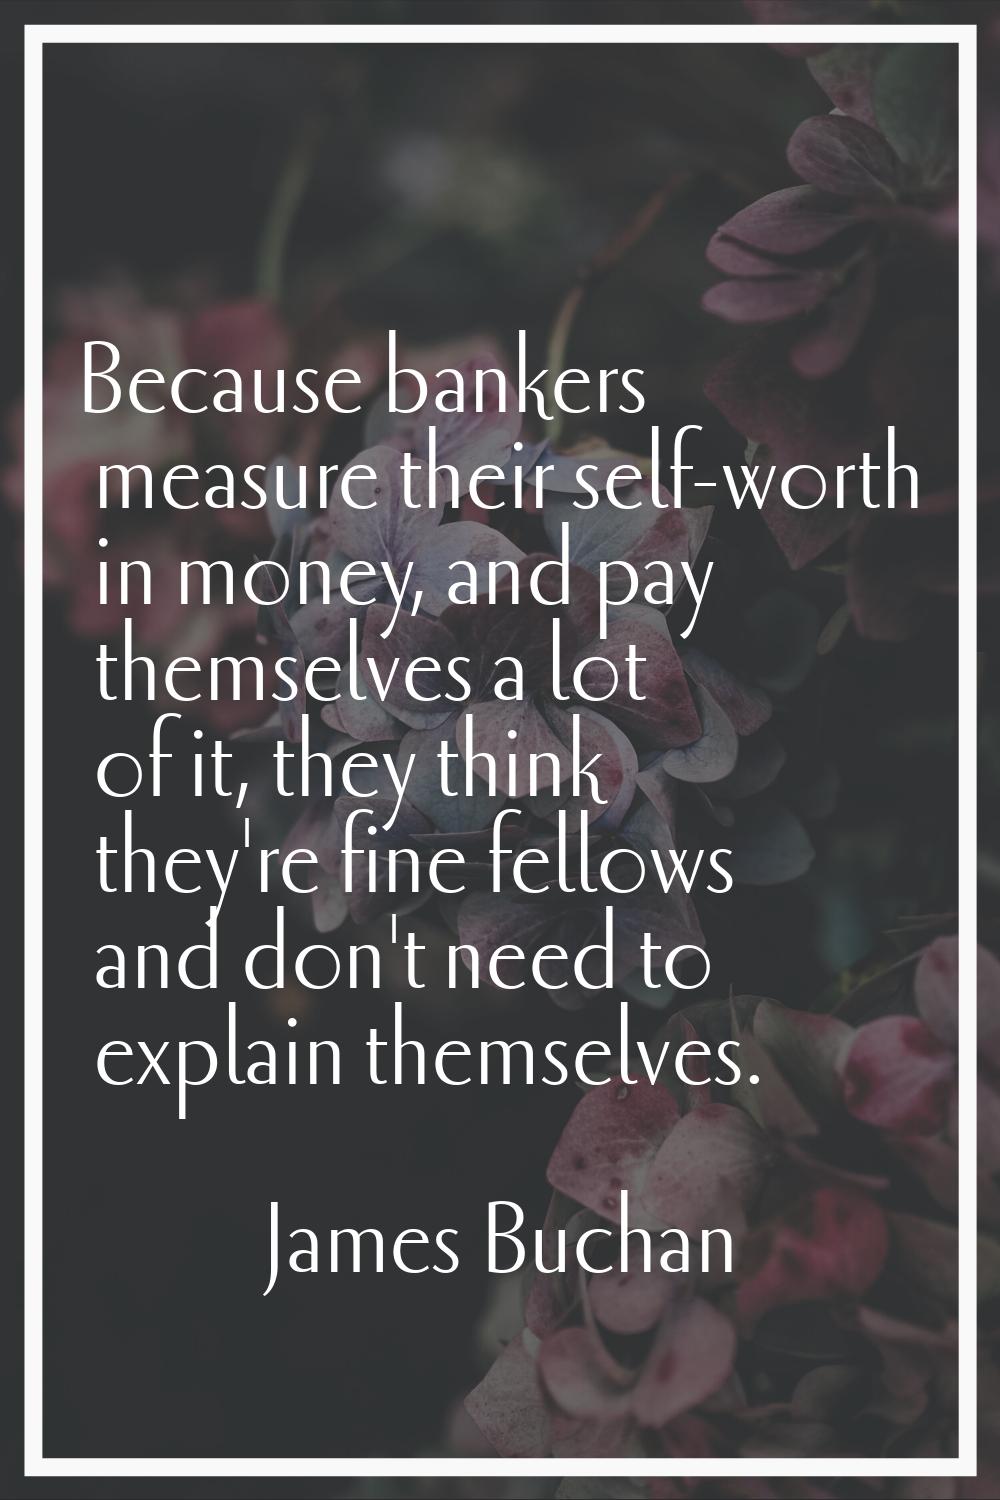 Because bankers measure their self-worth in money, and pay themselves a lot of it, they think they'